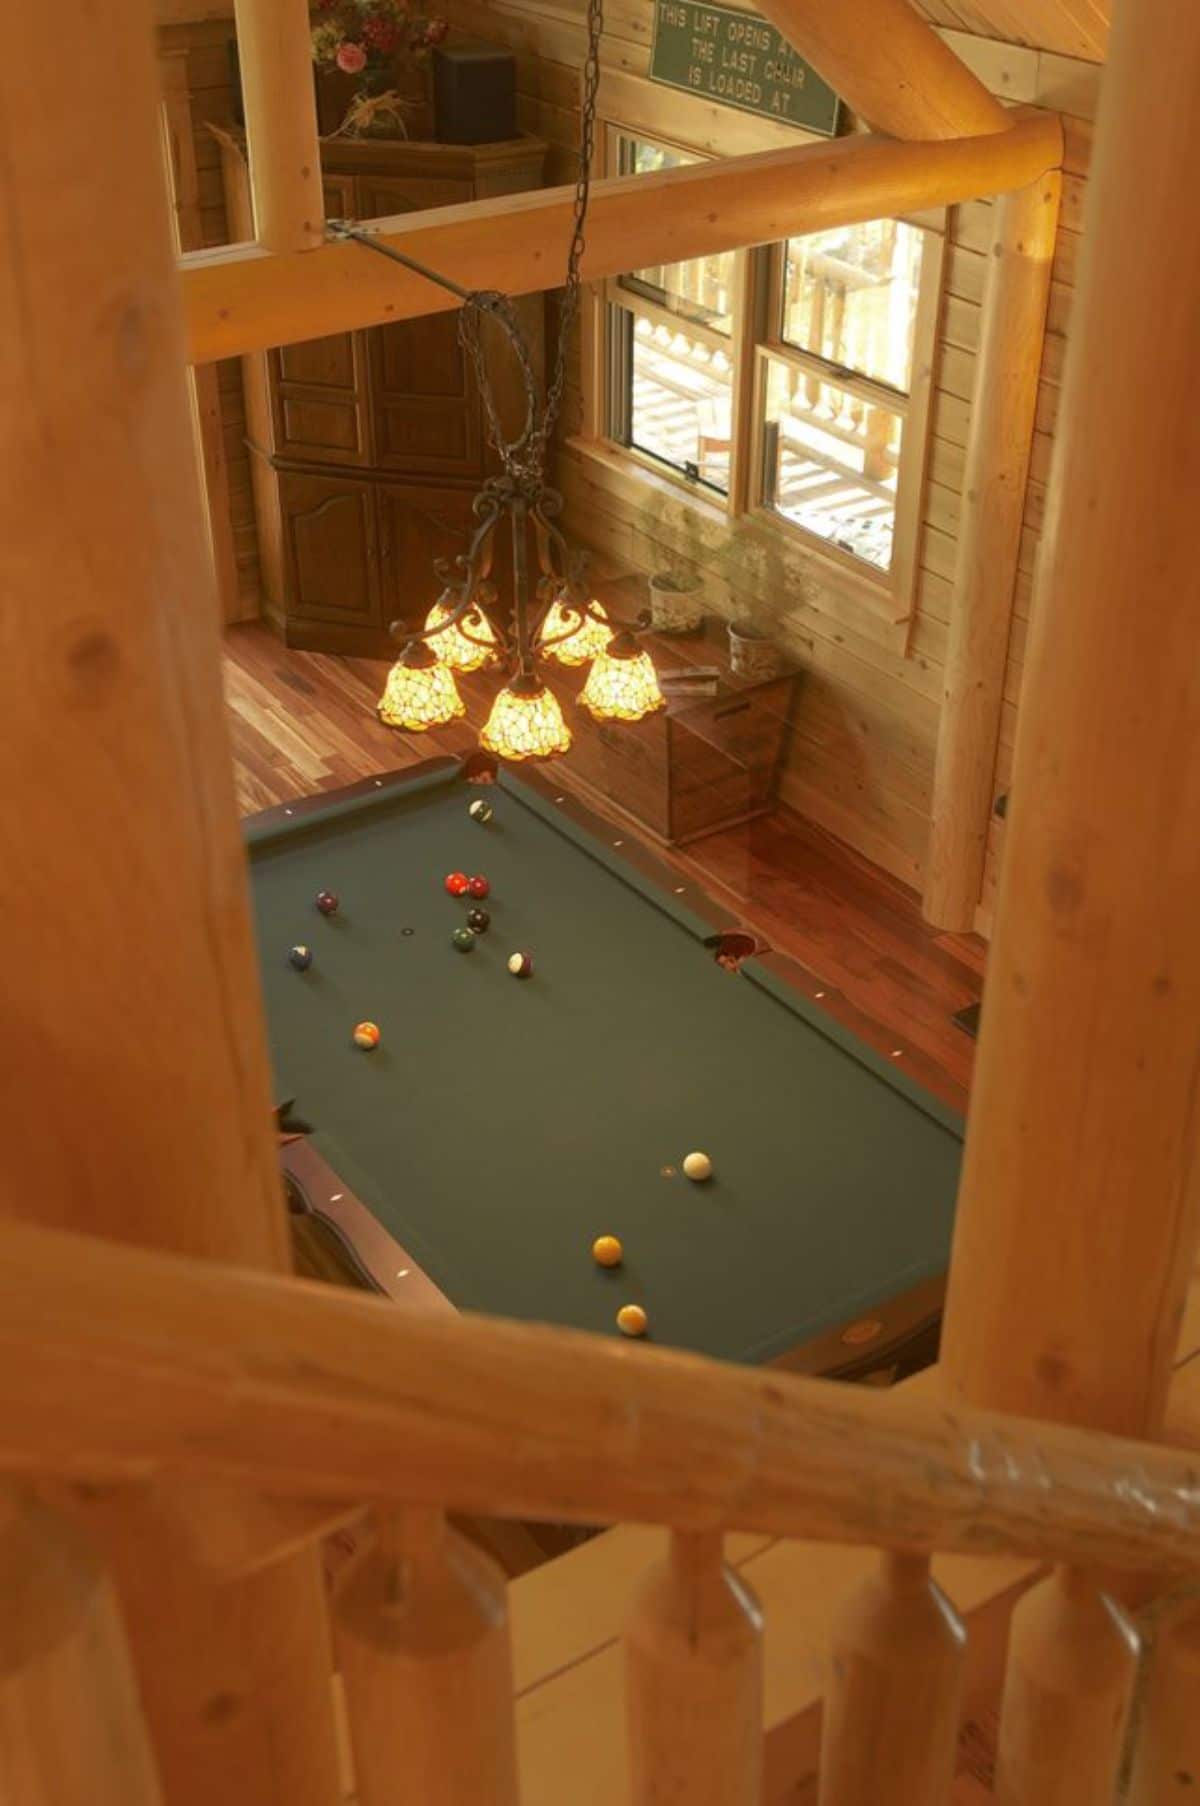 view from stairs down to green pool table in living room